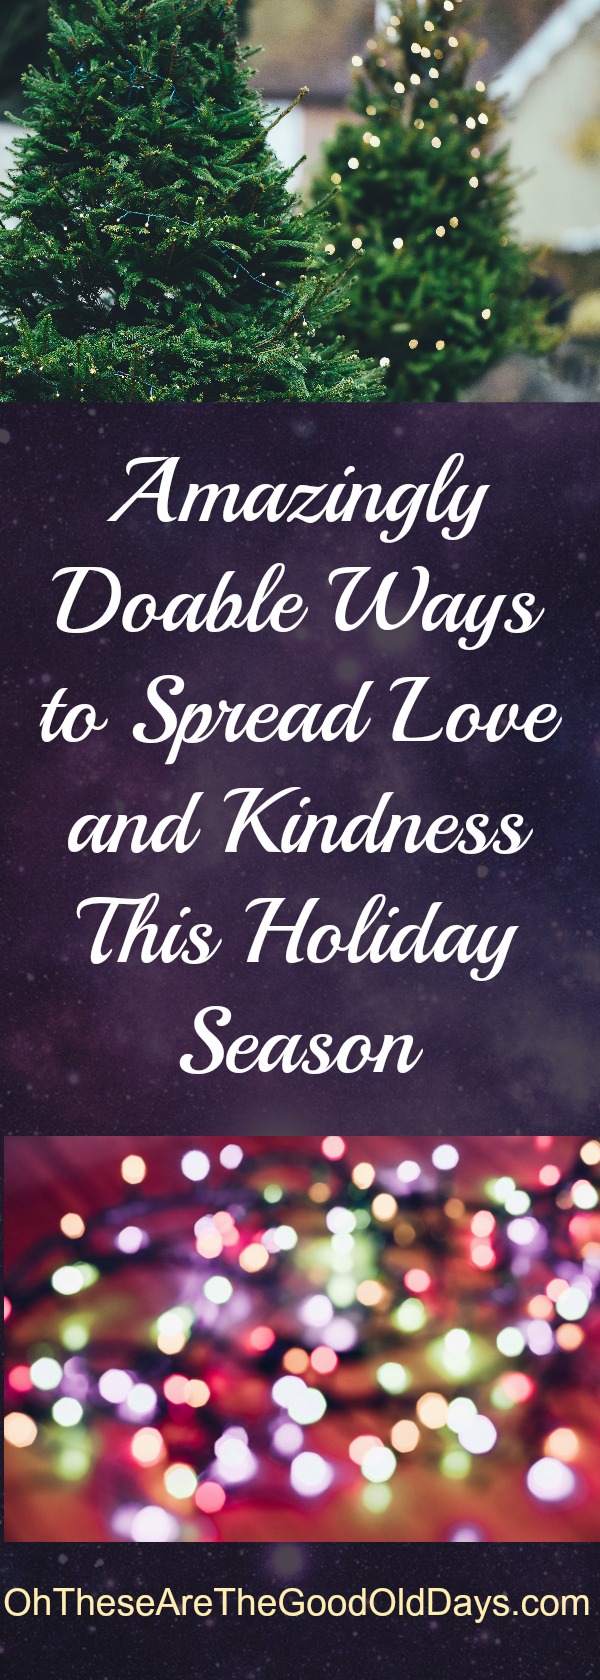 16 Amazingly Doable Ways to Spread Love and Kindness this Holiday Season